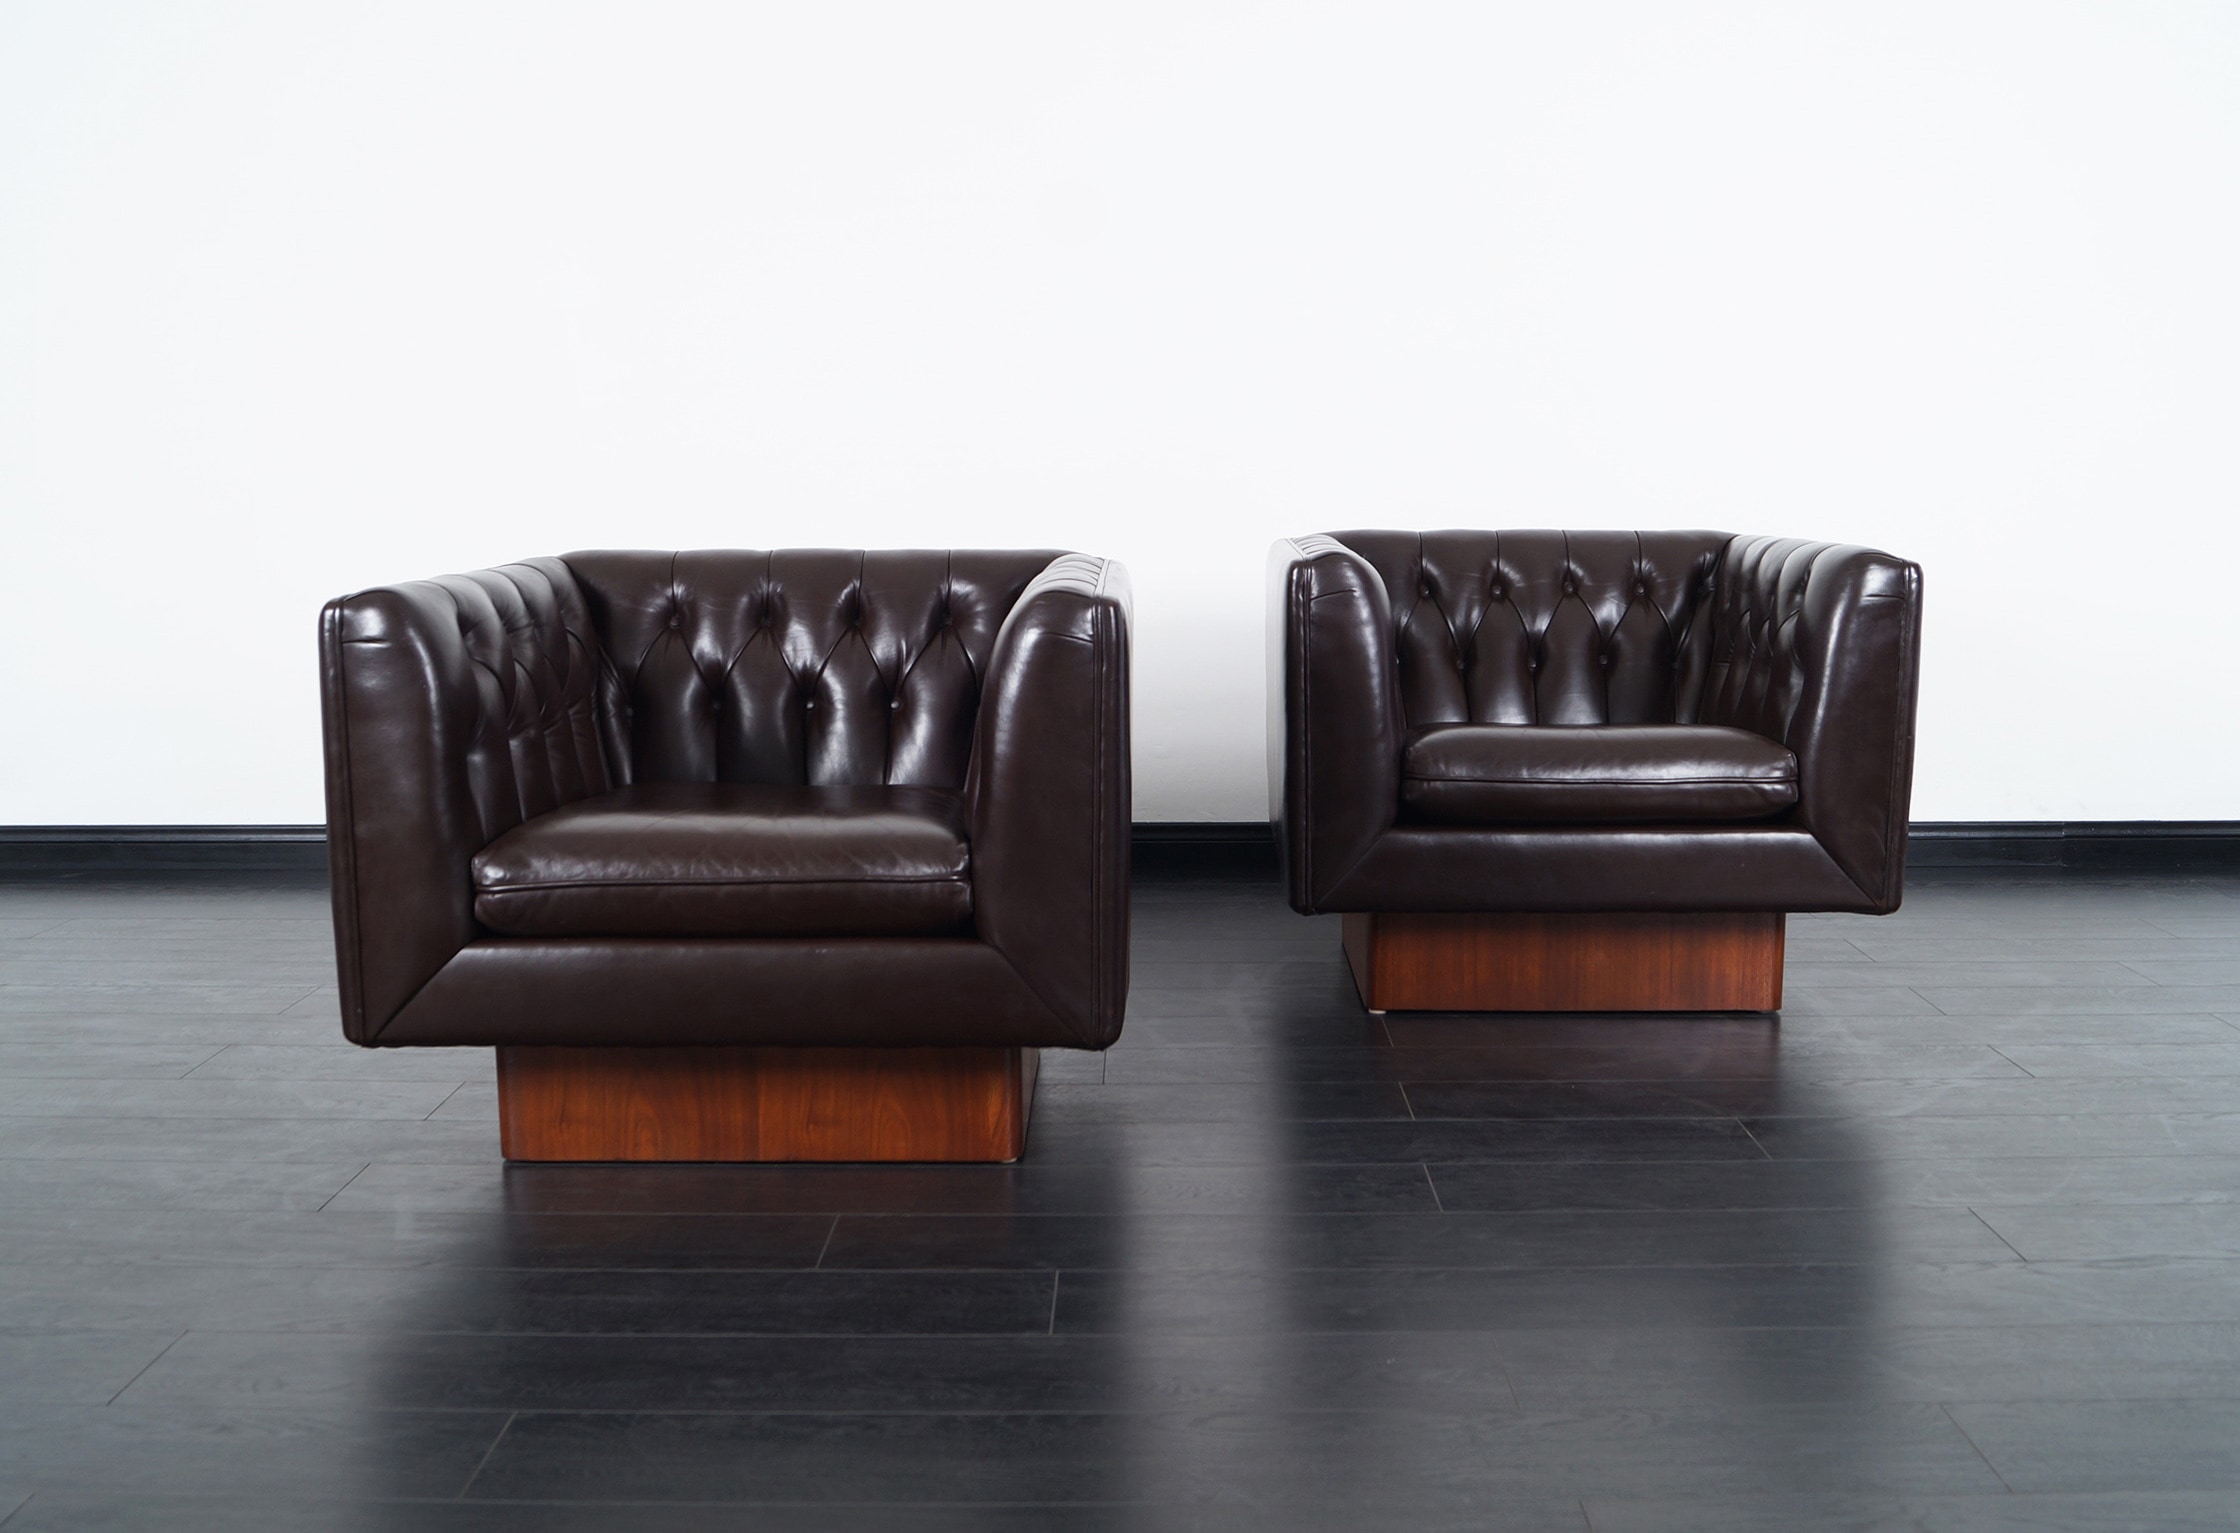 Vintage Tufted Leather Lounge Chairs by Milo Baughman